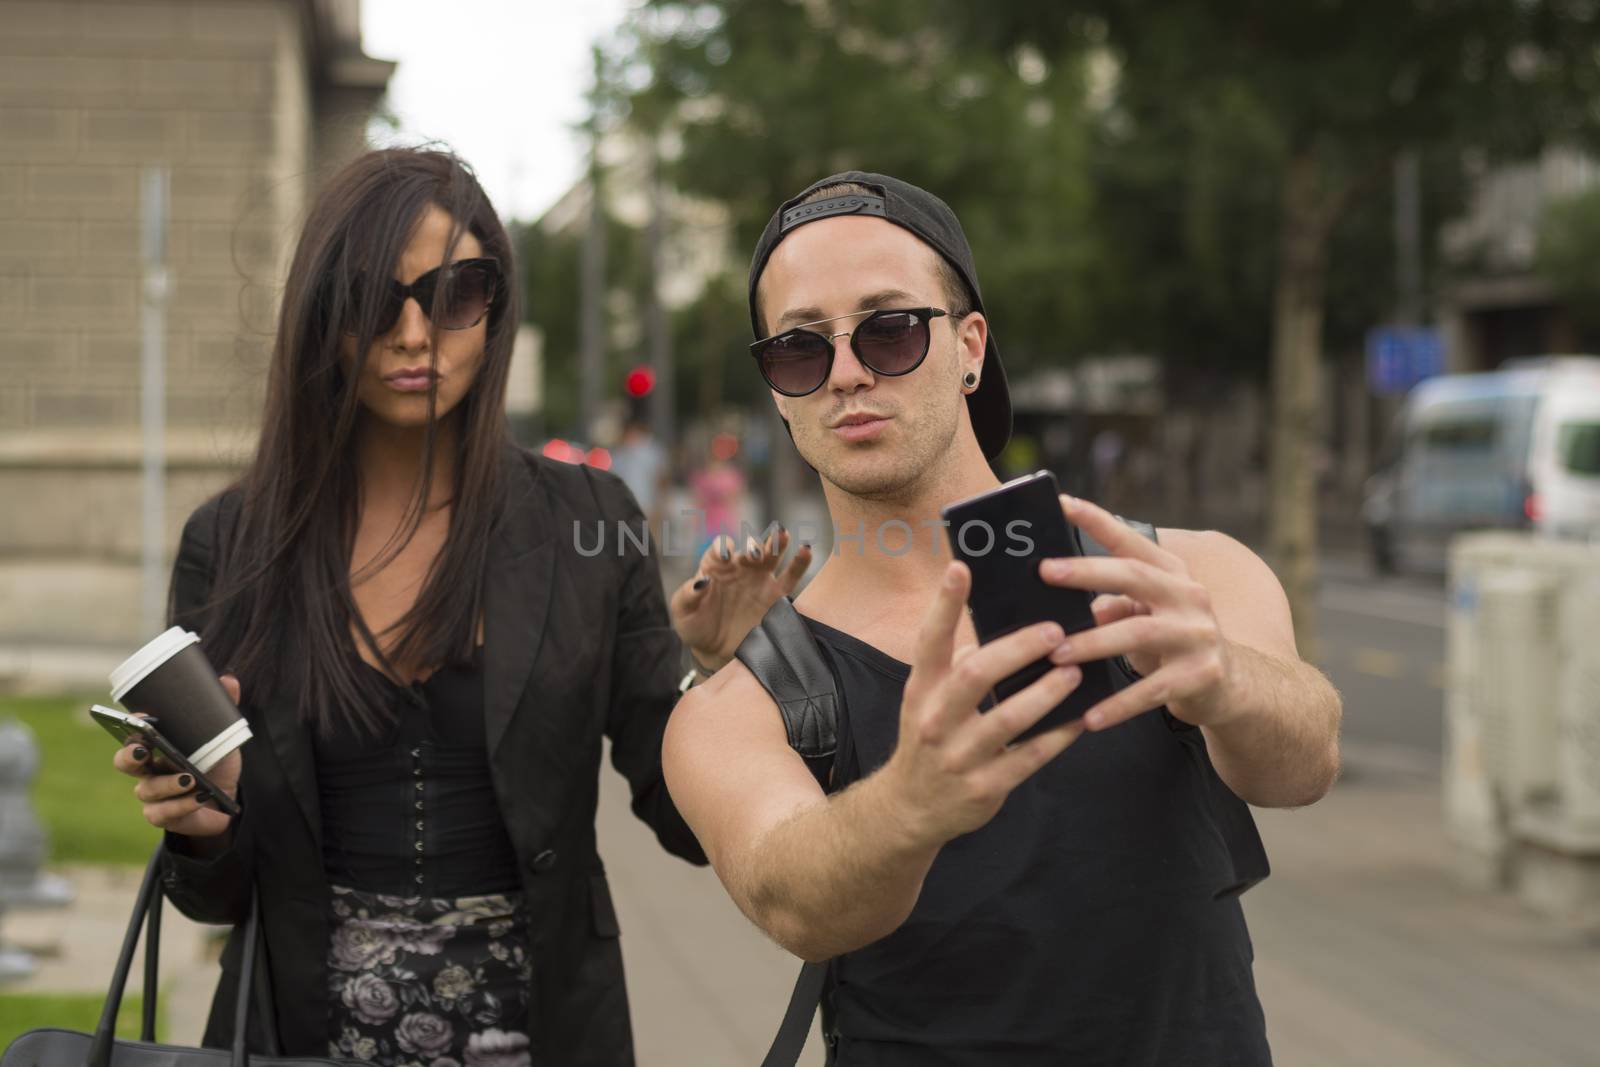 Young cheerful friends taking photos of themselves on smart phone, urban city outdoor scene, selective focus